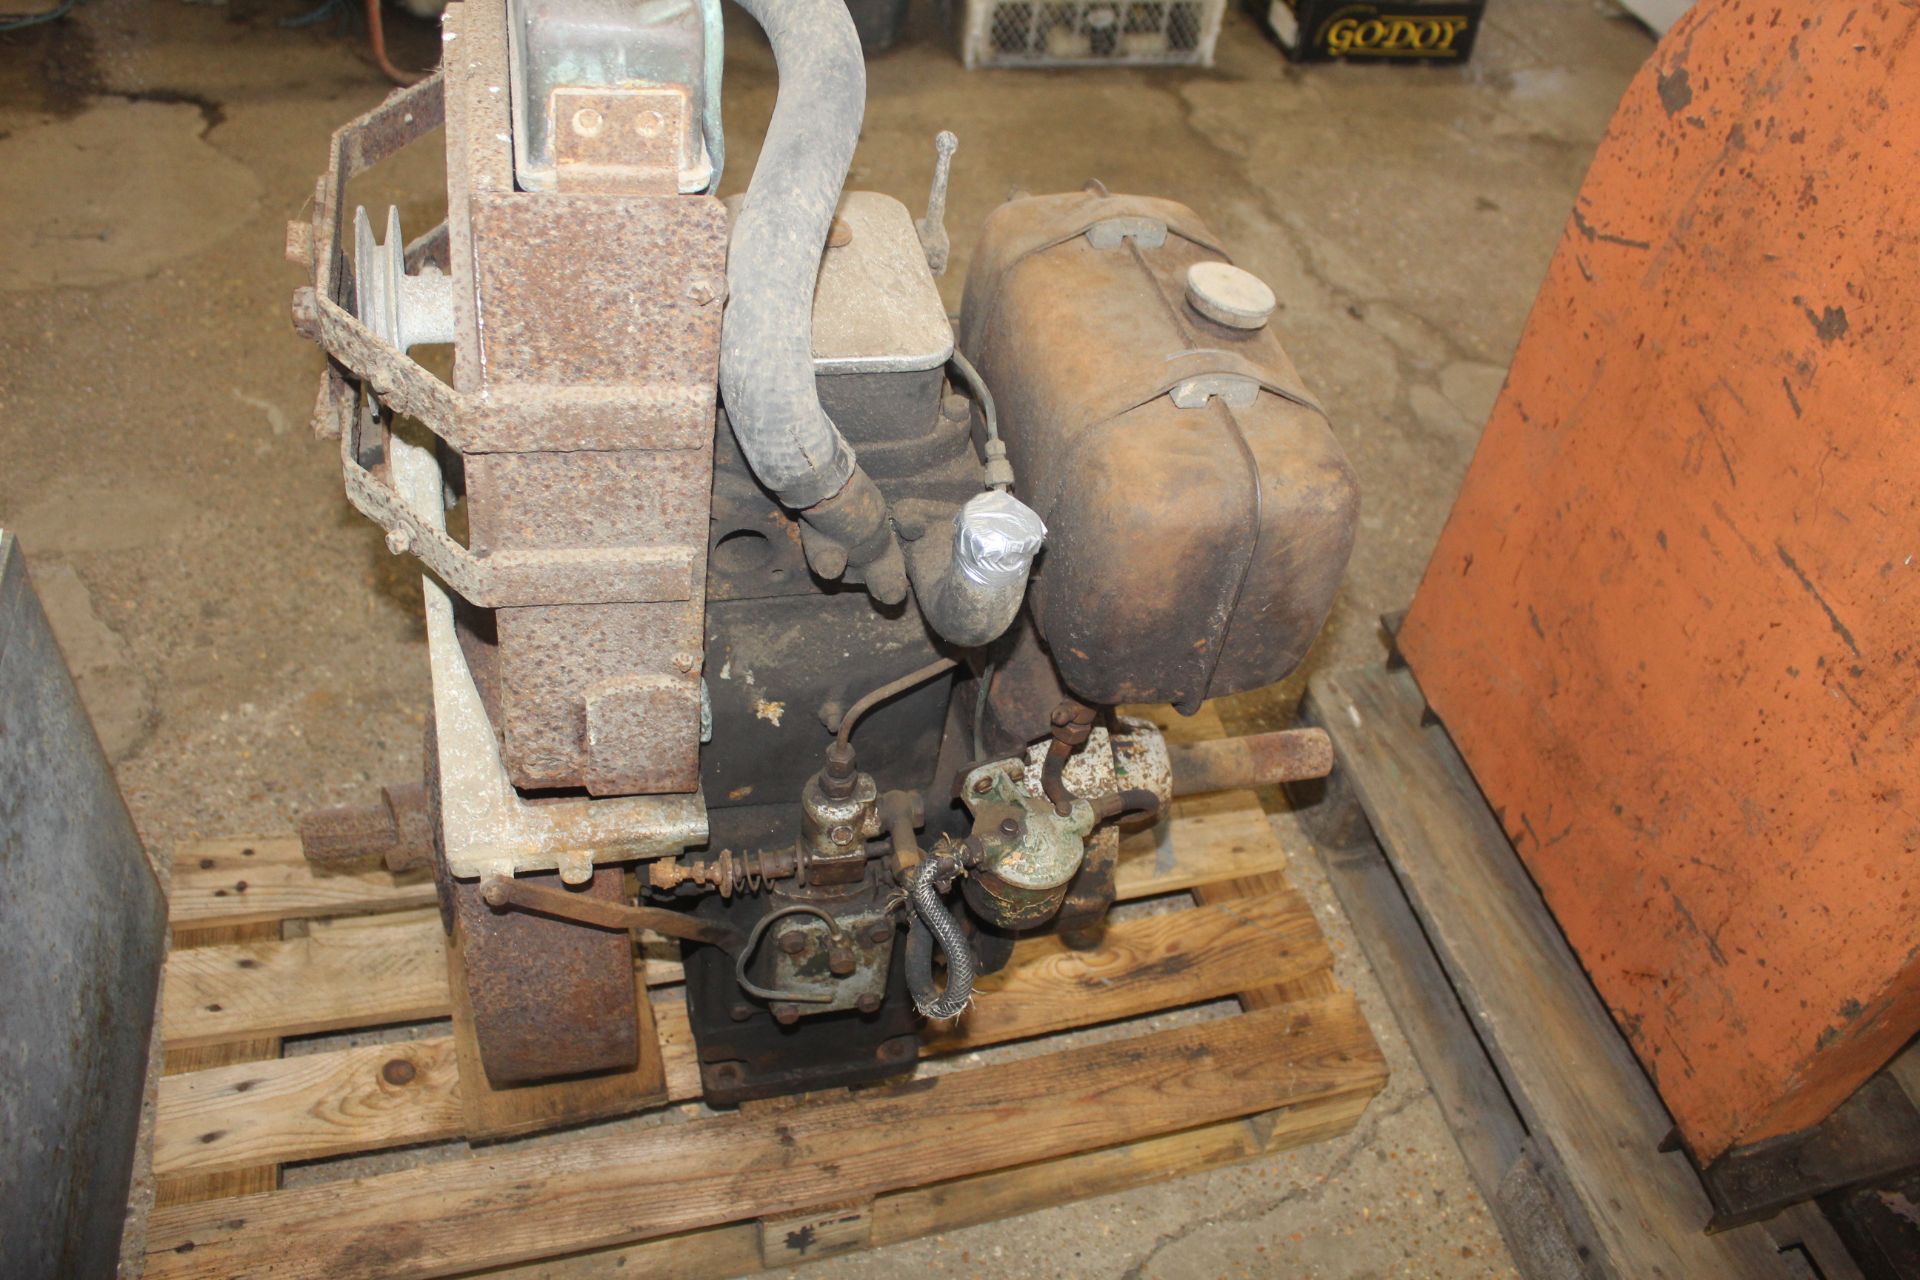 Petter AV1 diesel 5bhp water cooled stationary engine. With radiator and fan. For restoration. V - Image 7 of 8